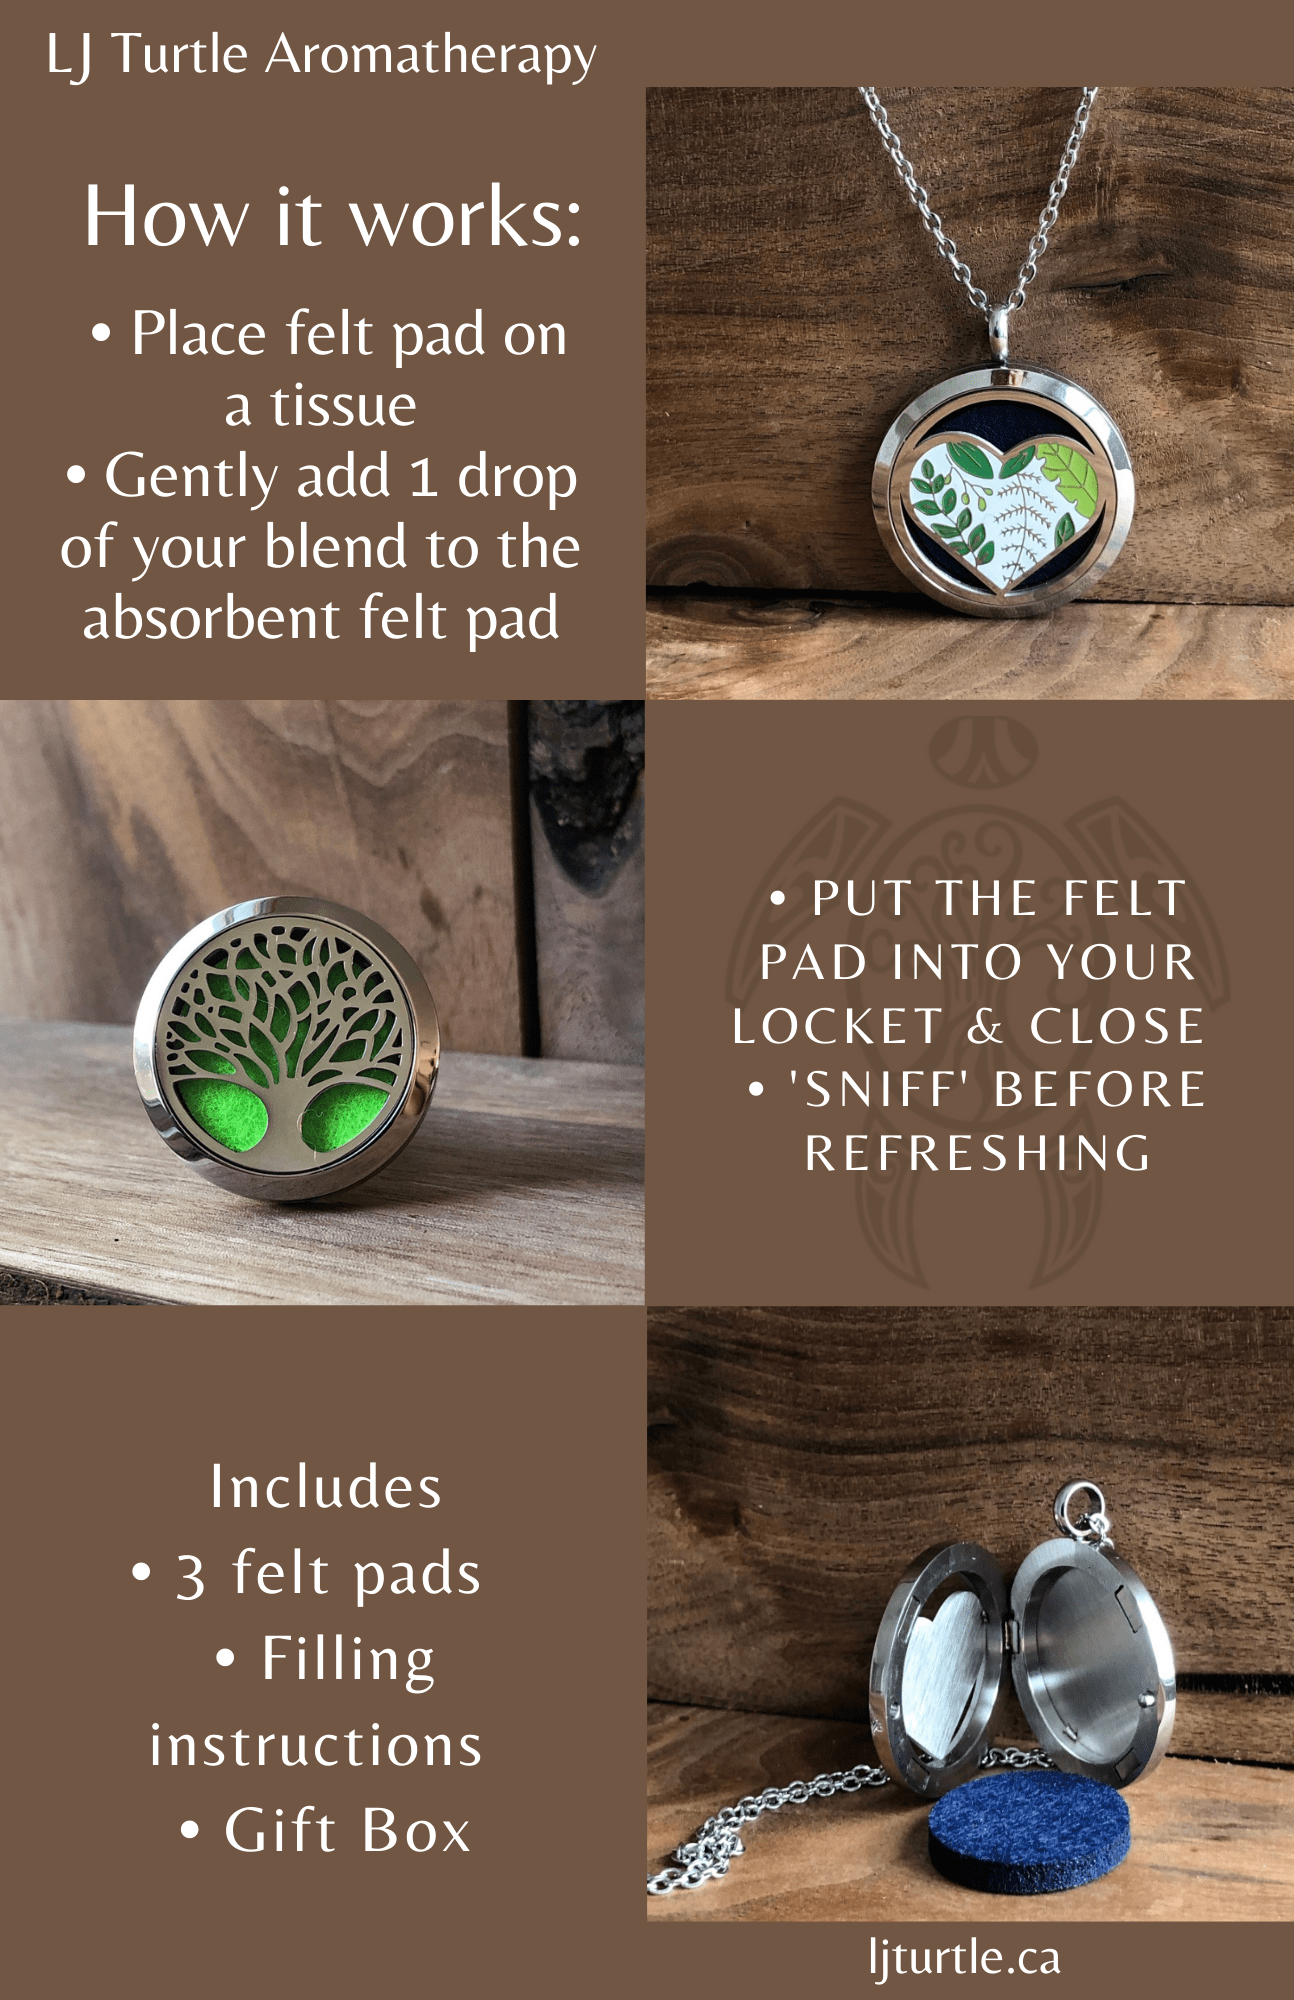 LJ Turtle Aromatherapy & Accessories Tree | Face Mask Pin